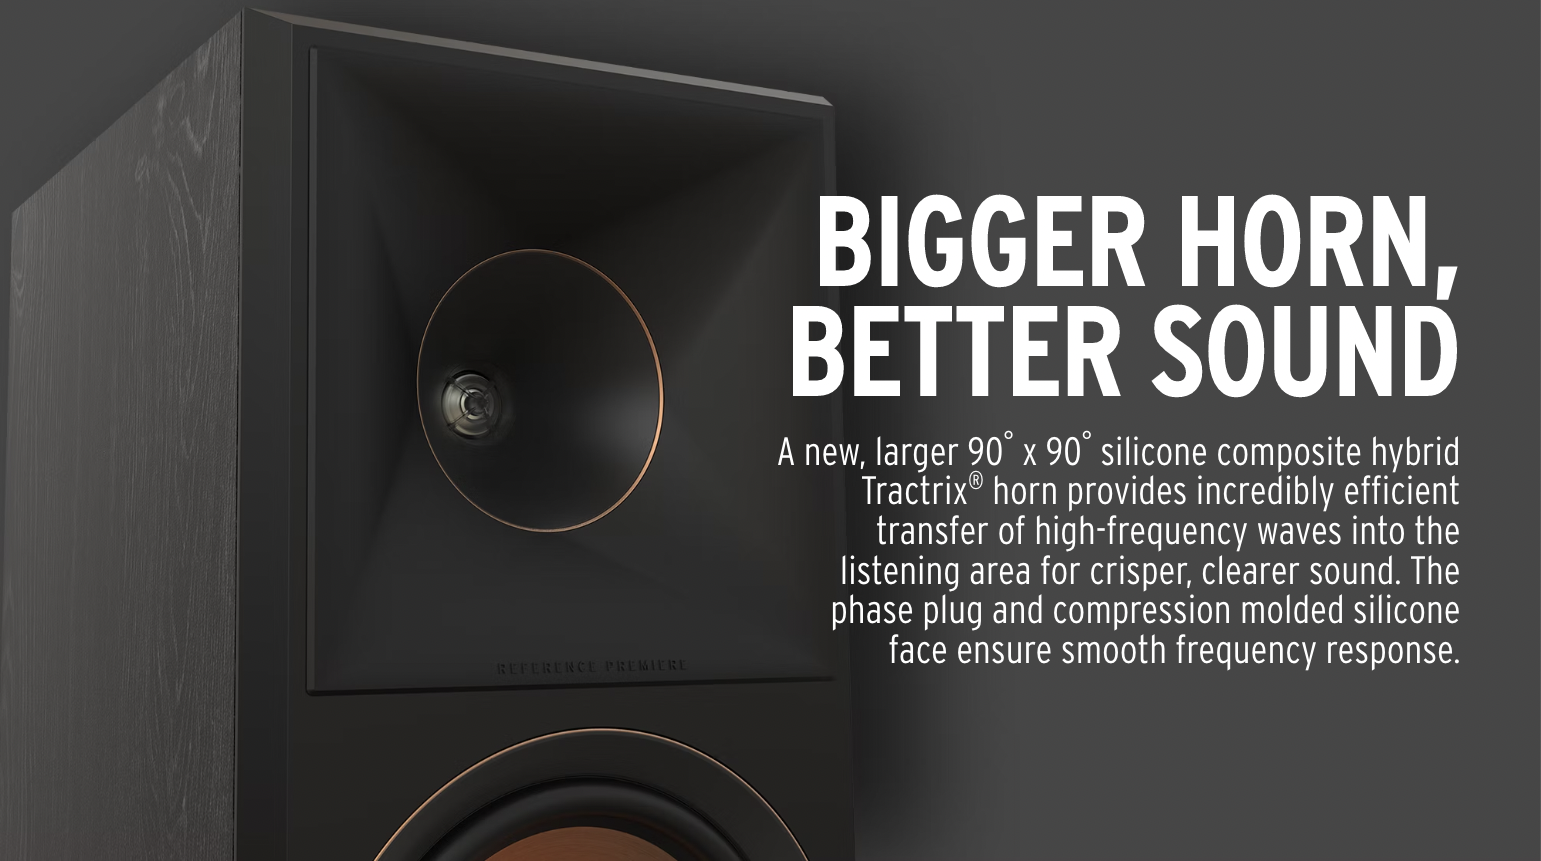 A new, larger 90° x 90° silicone composite hybrid Tractrix horn provides incredibly efficient transfer of high-frequency waves into the listening area for crisper, clearer sound. The phase plug and compression molded silicone face ensure smooth frequency response. 